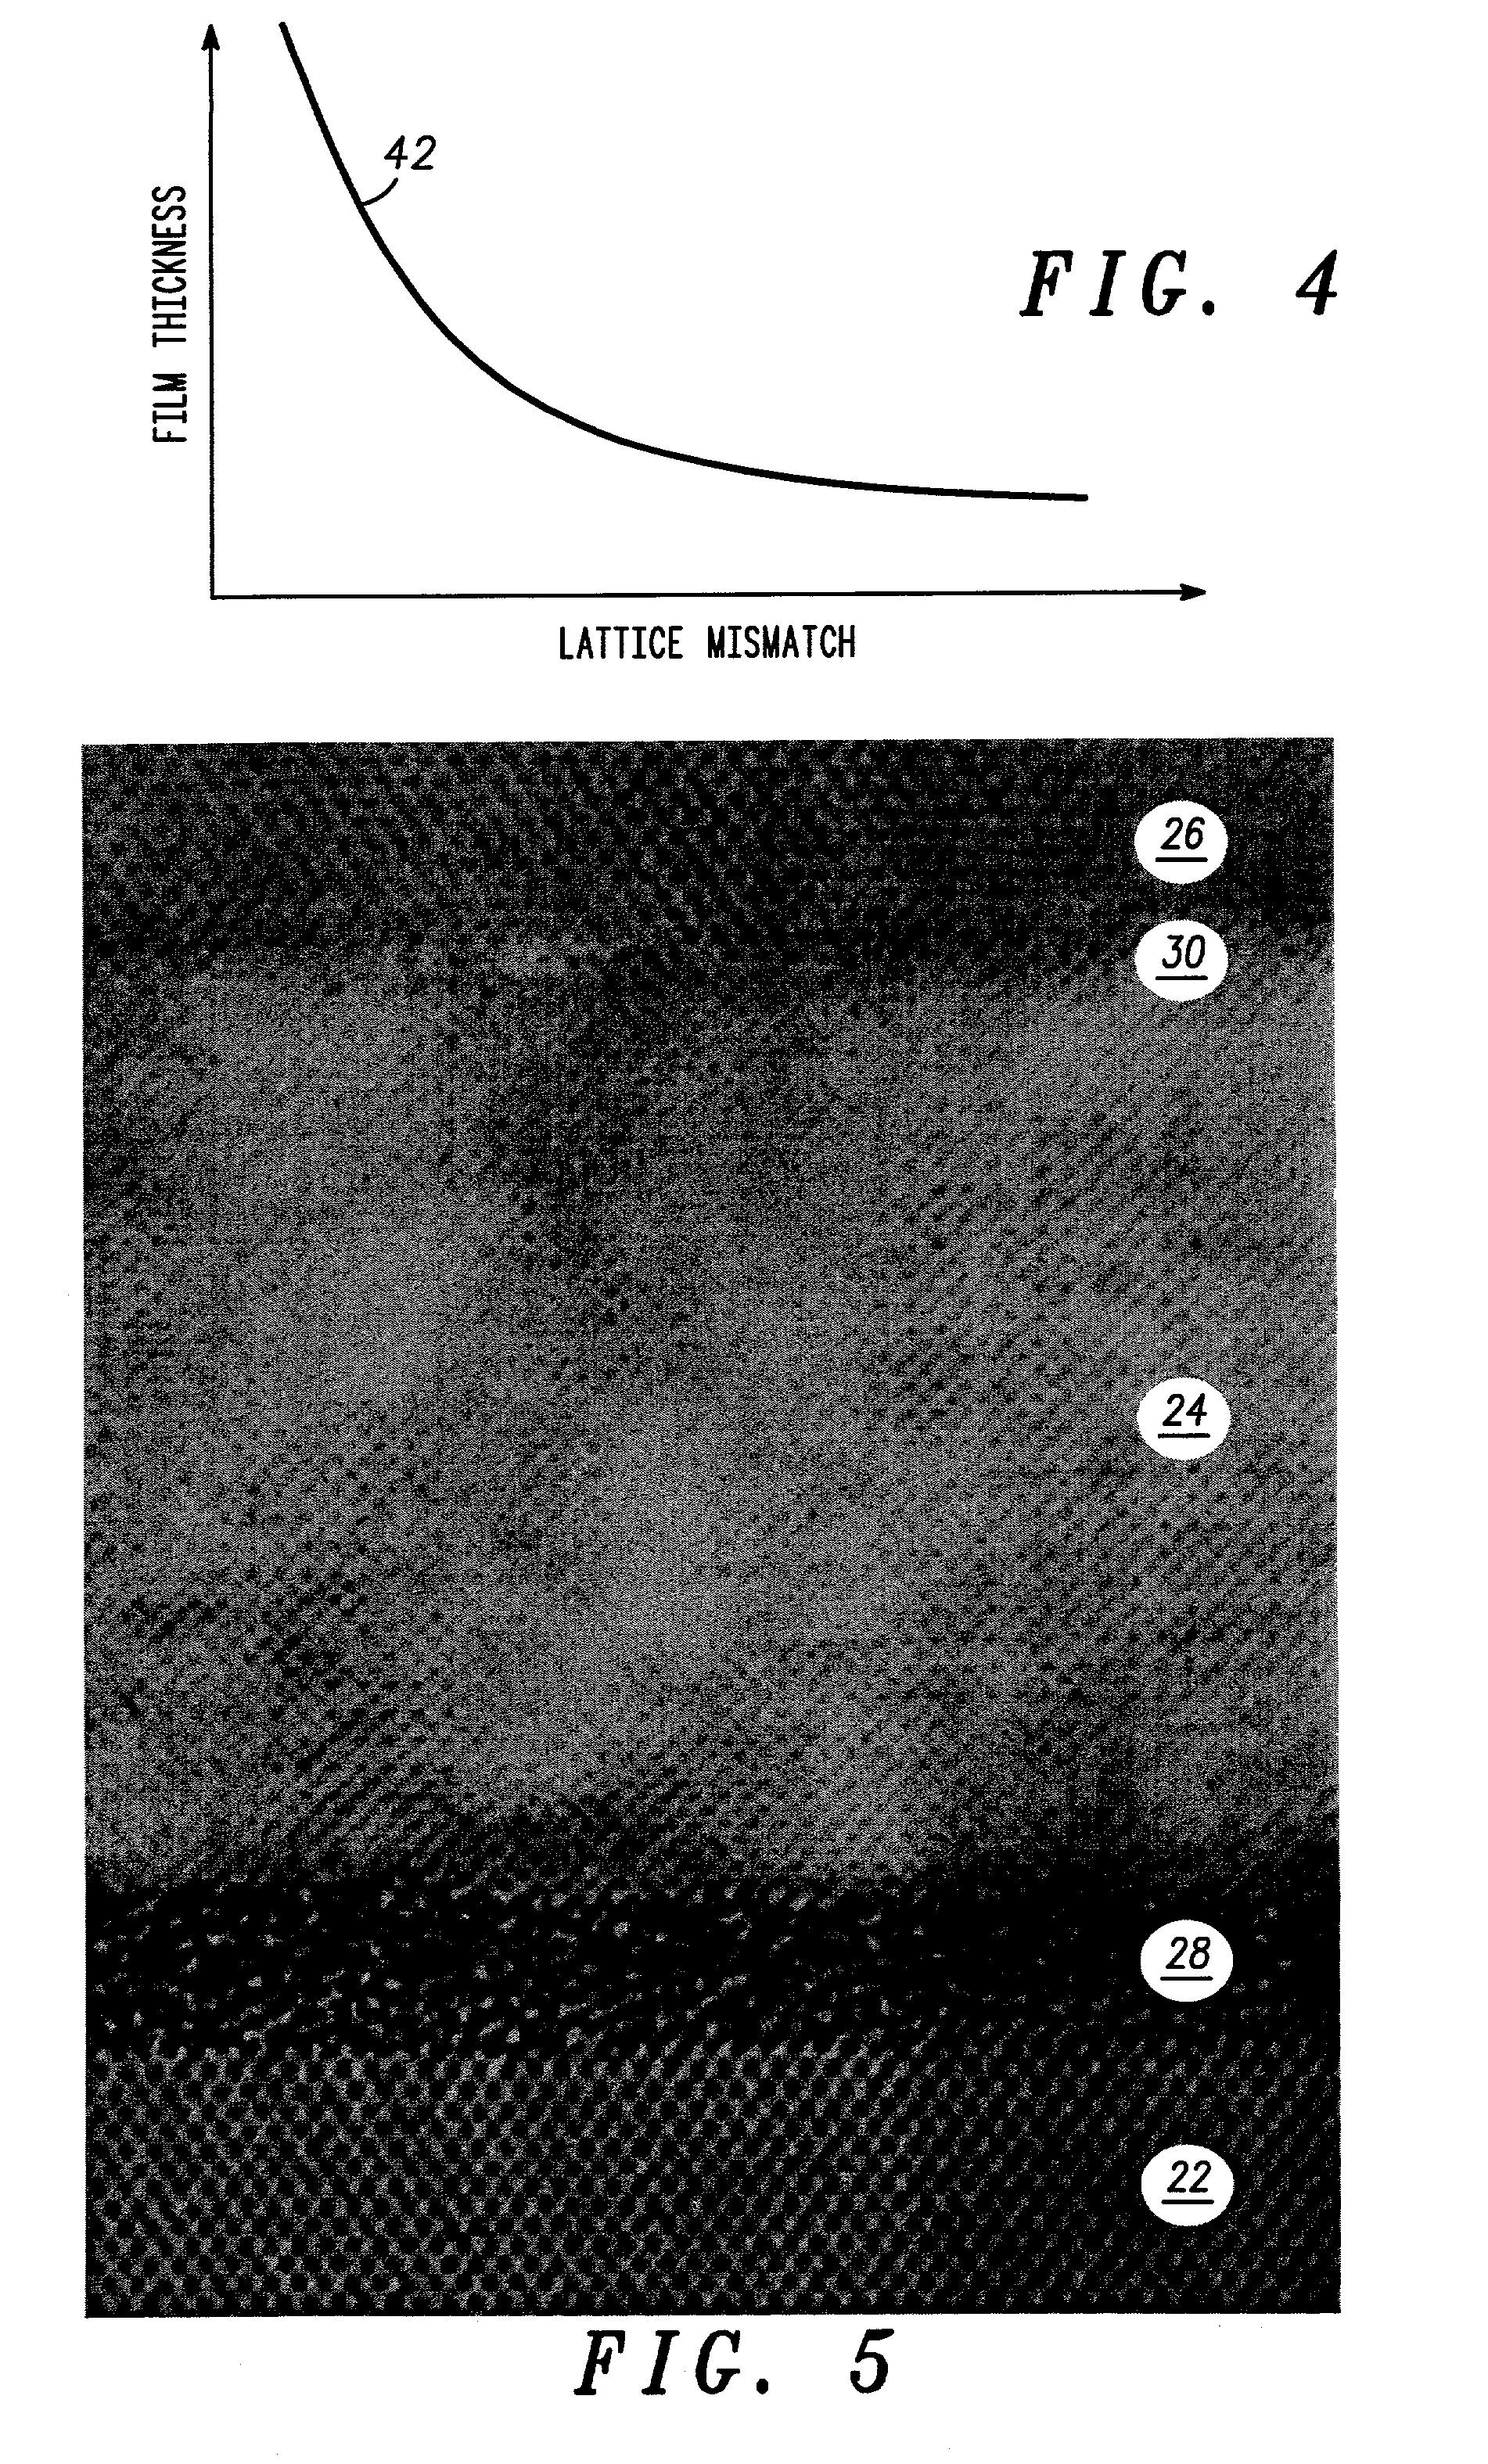 Structure and method for fabricating semiconductor structures and devices utilizing the formation of a compliant III-V arsenide nitride substrate used to form the same